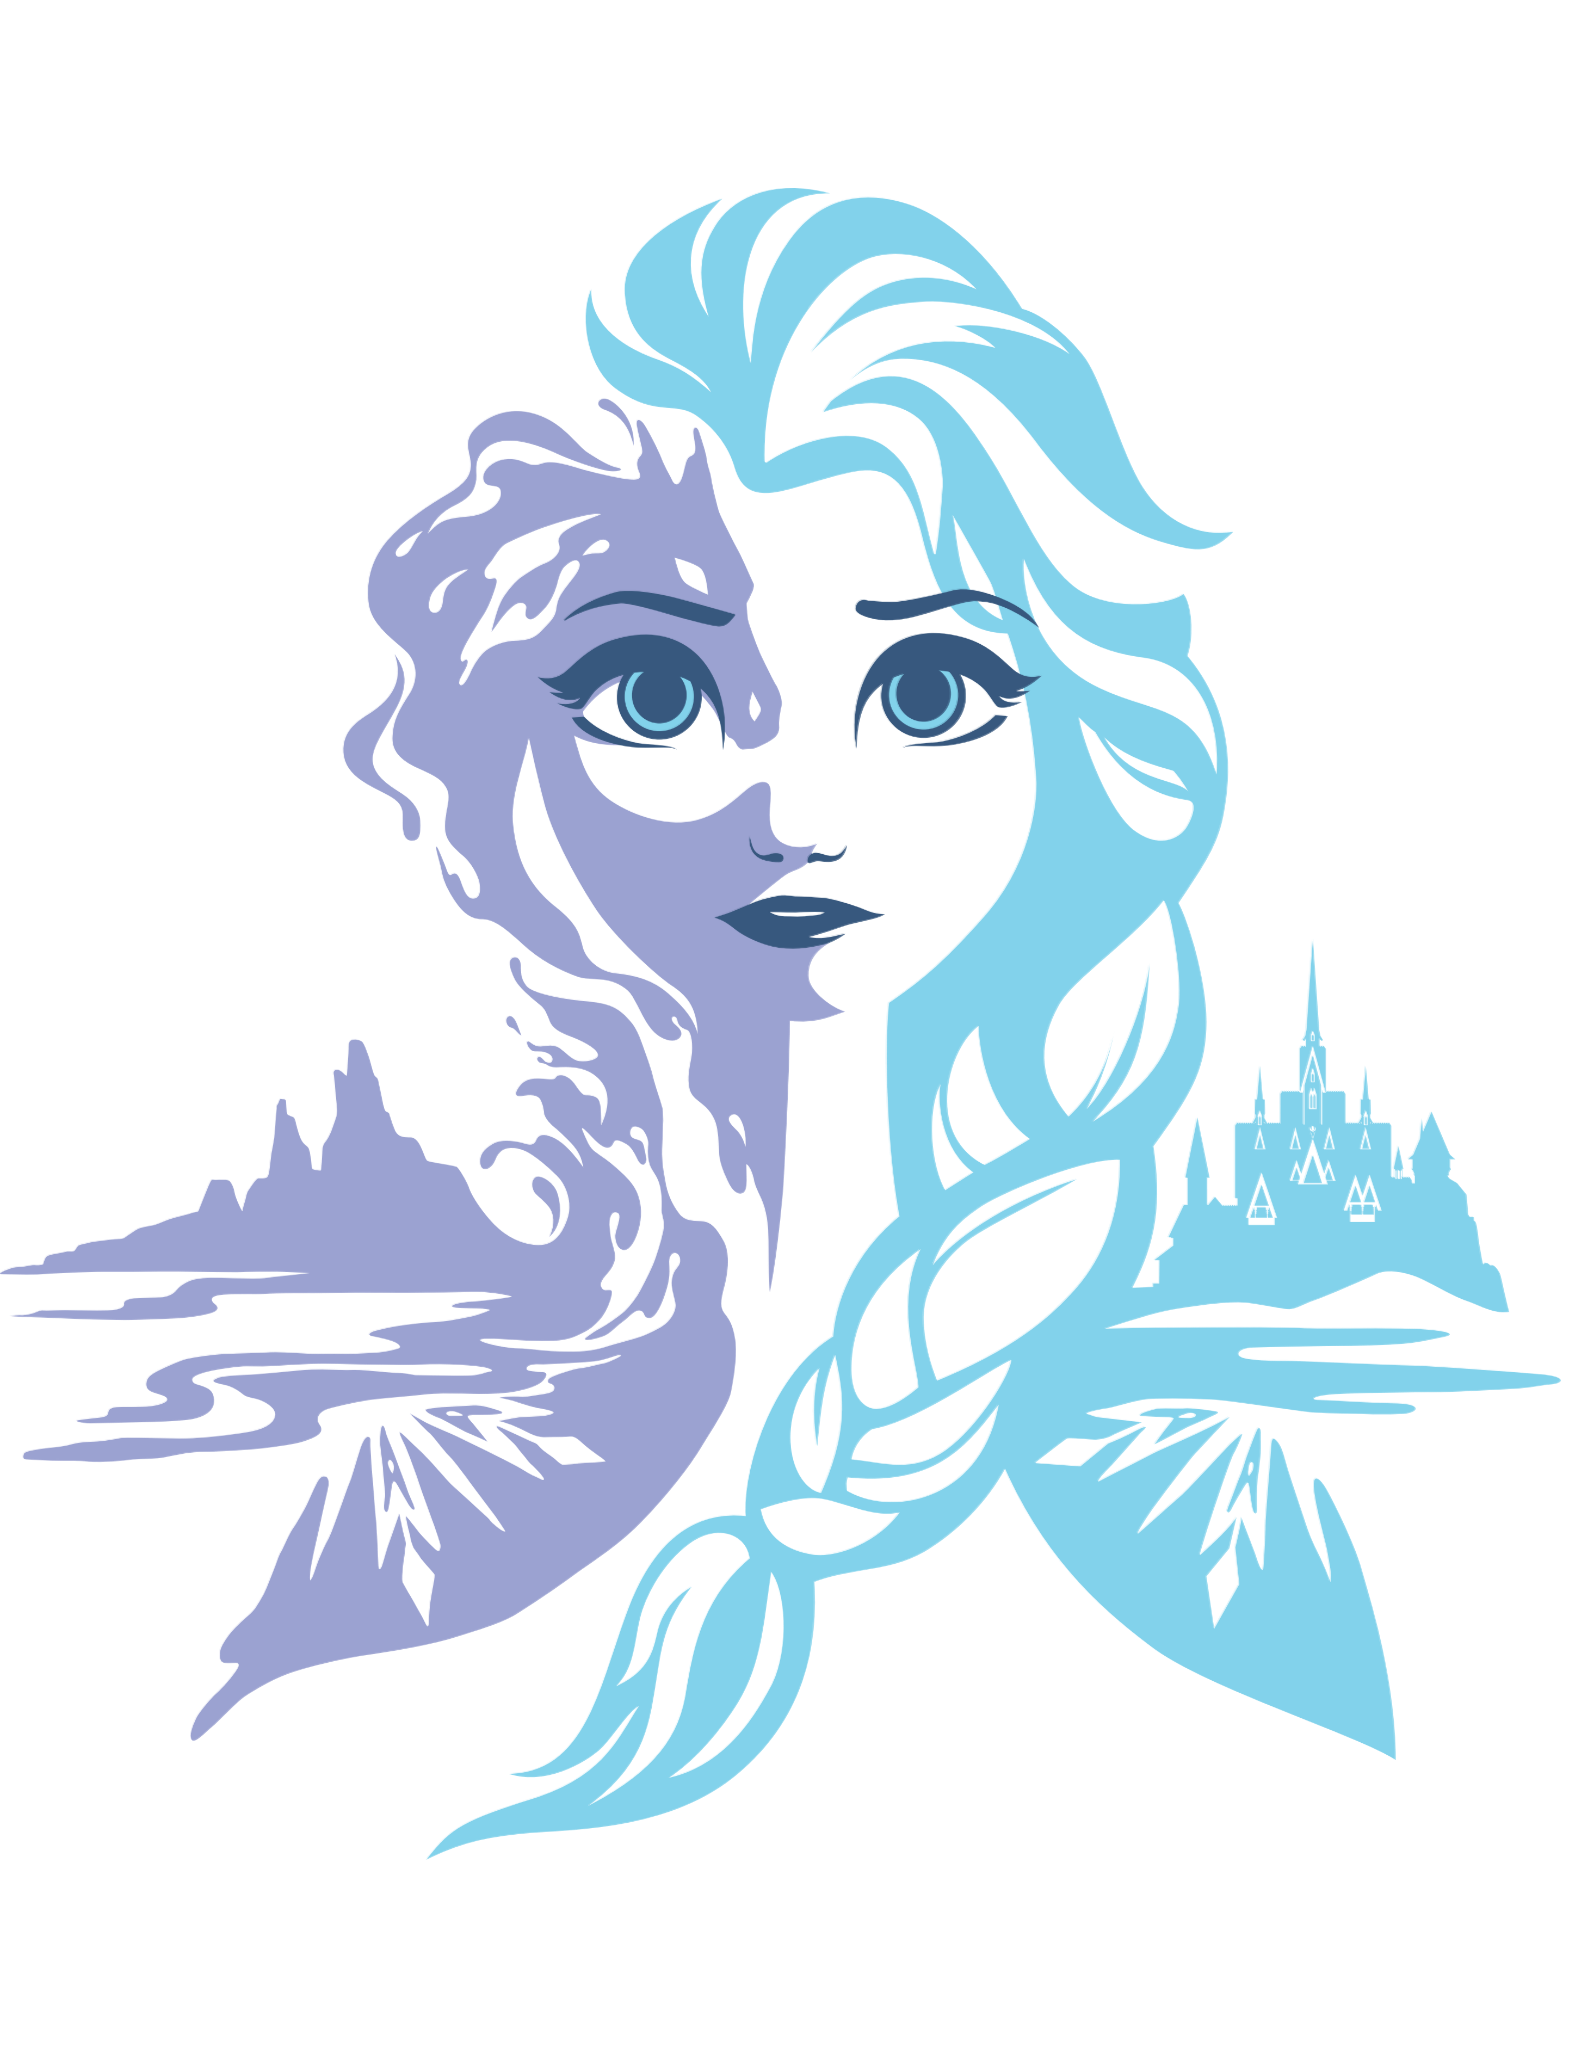 Disney Frozen 2 clipart in png format with a clear.